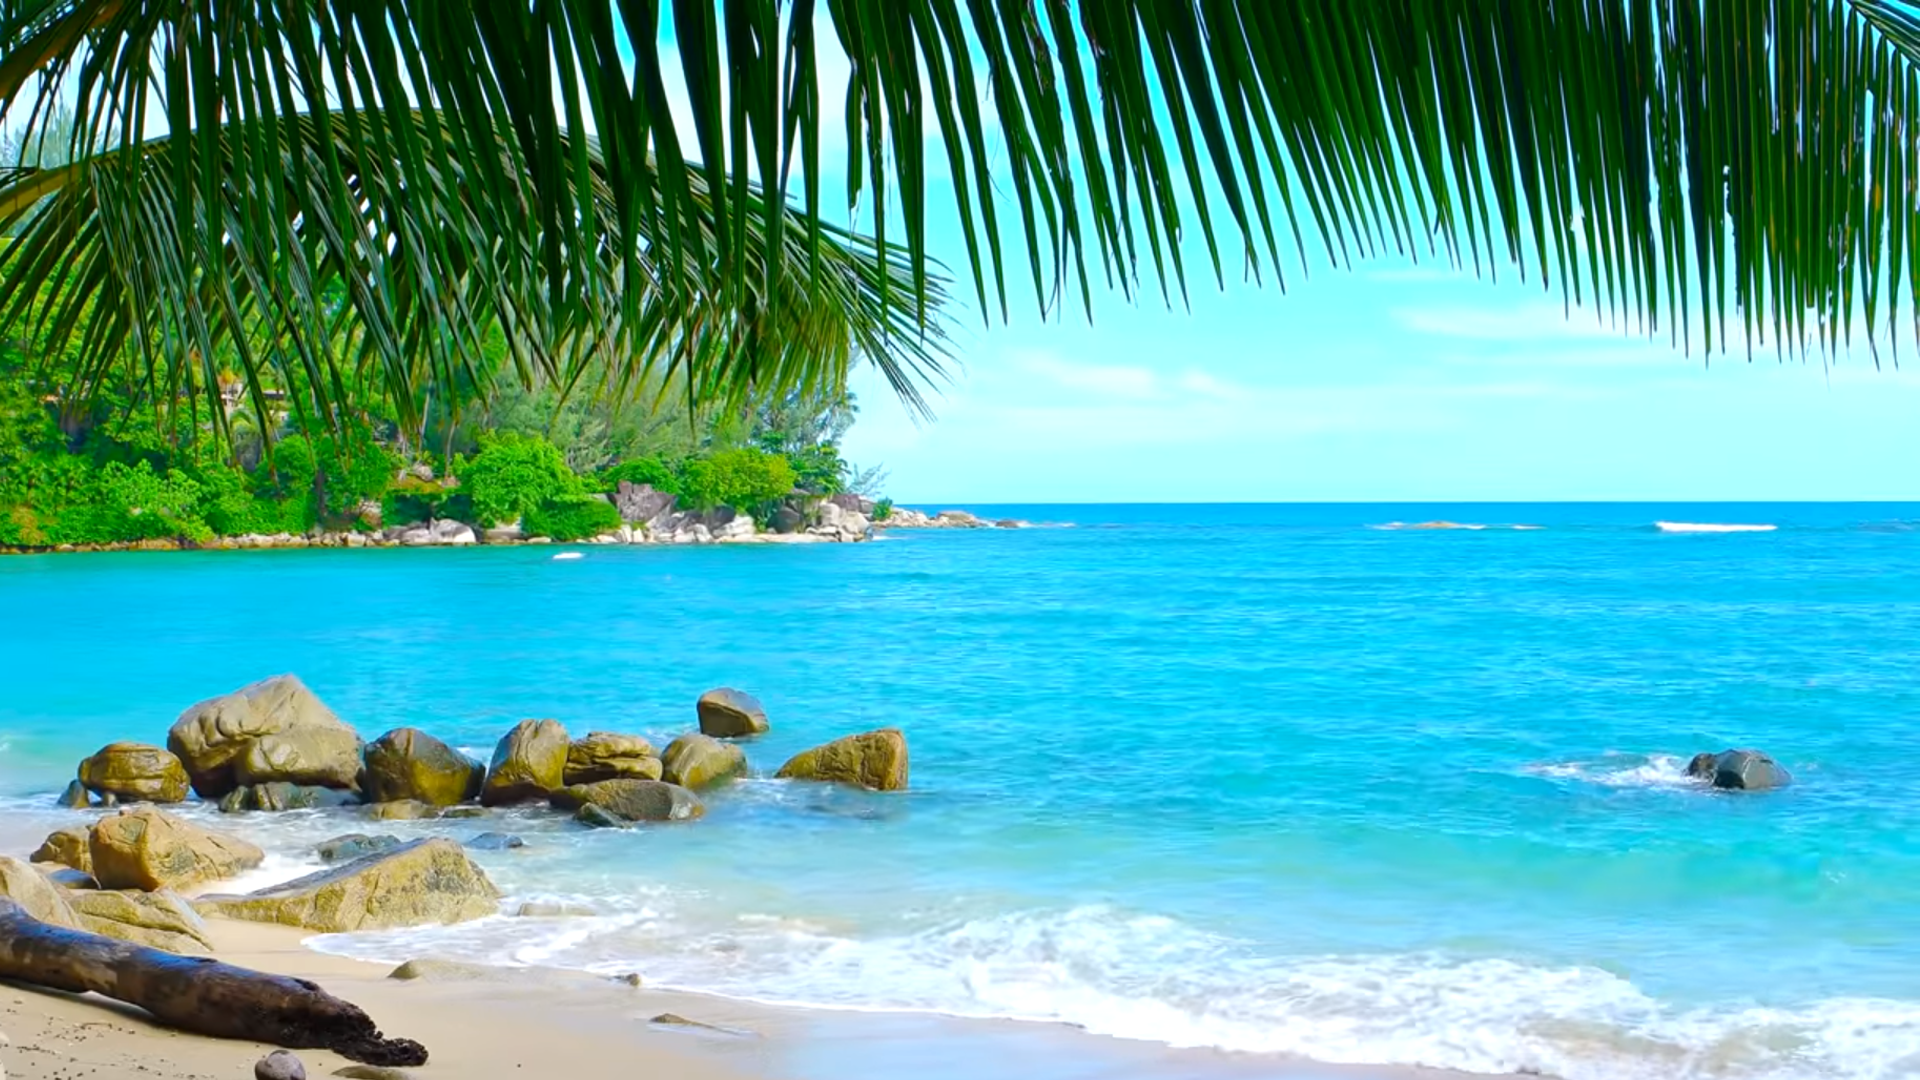 10 Best Tropical Beaches You Must Visit in Your Lifetime Add to